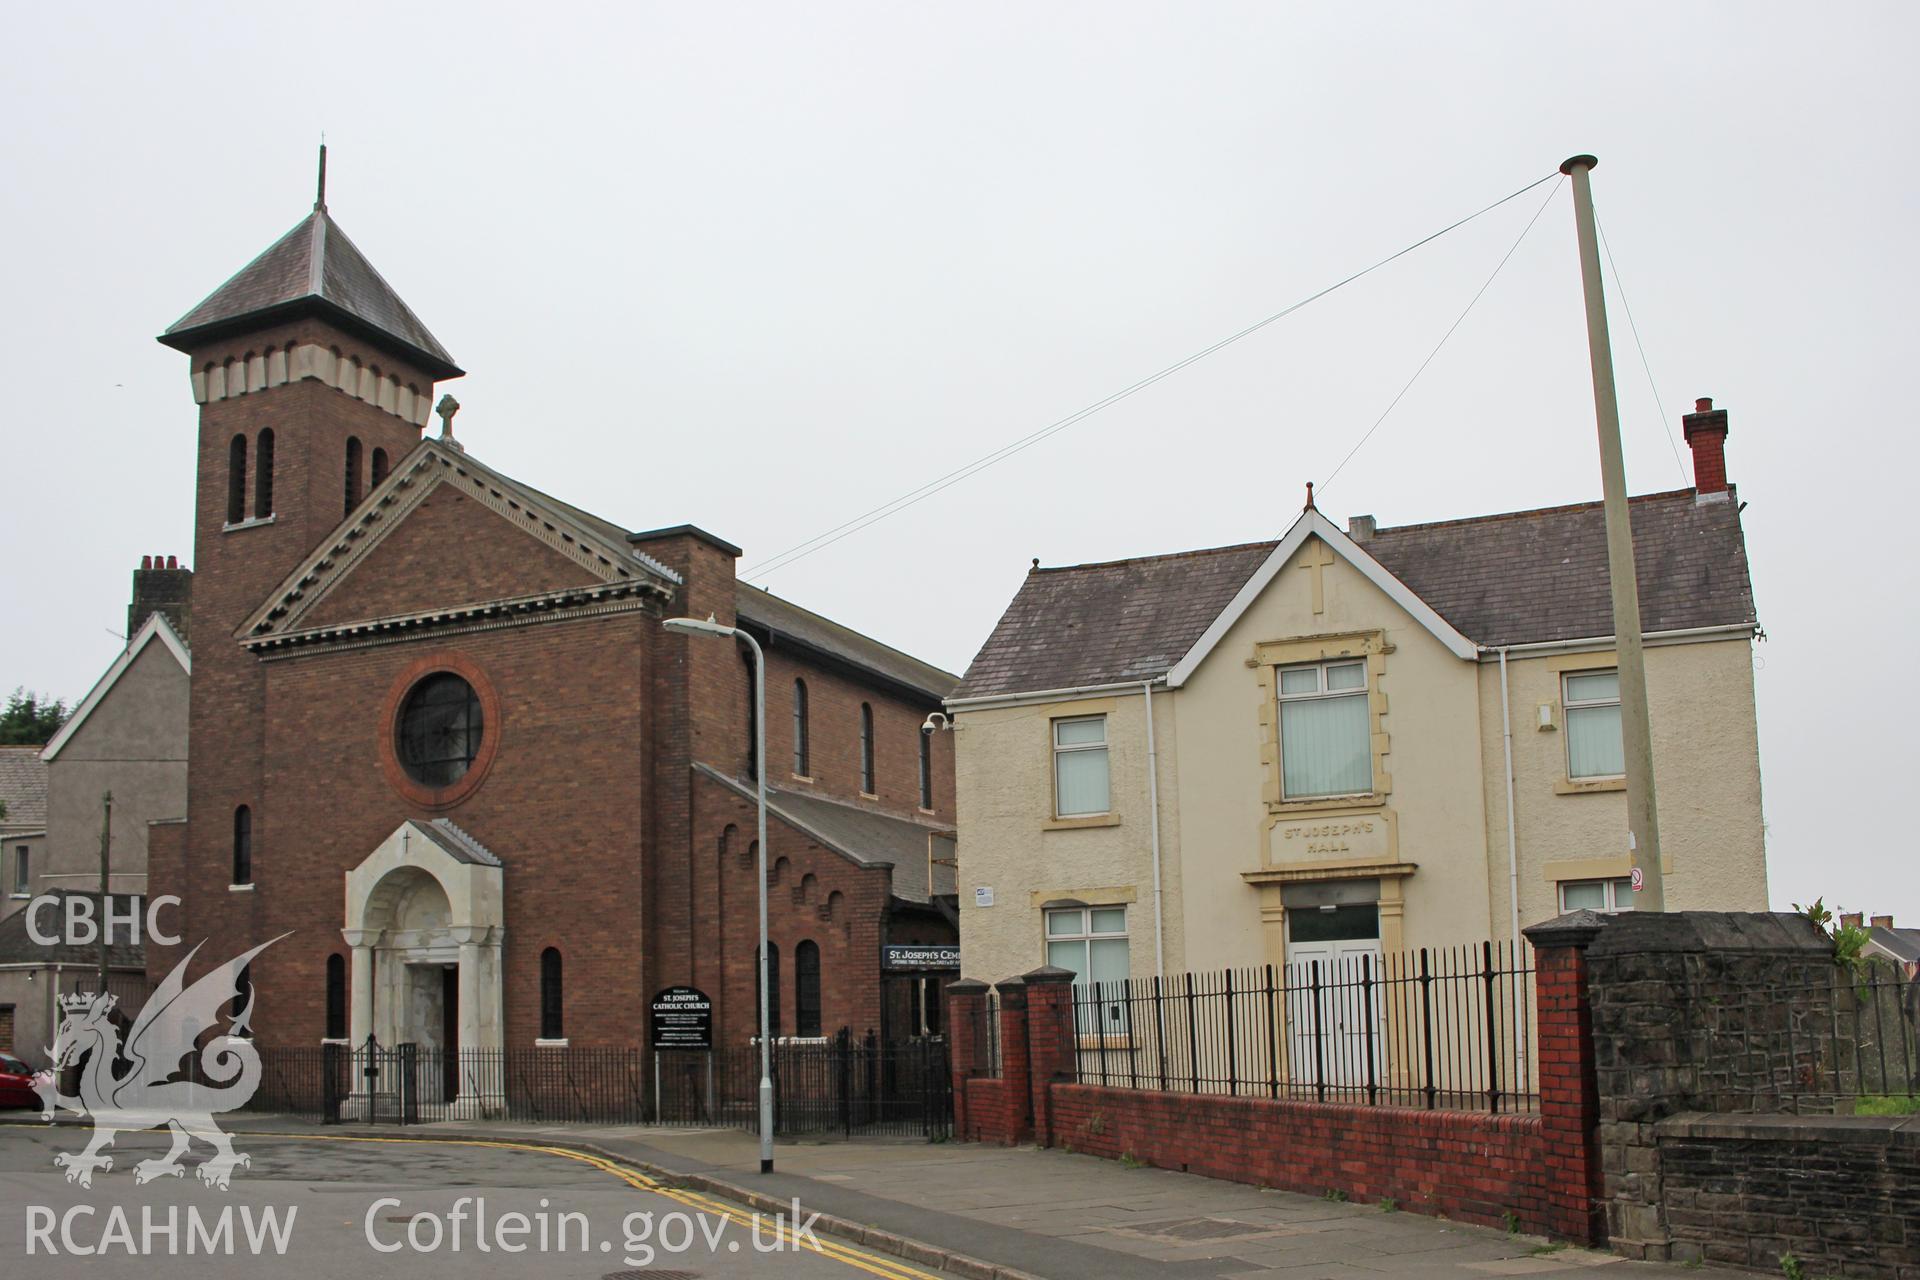 Exterior view of St. Joseph's Catholic Church and Hall in Aberafon. Photograph taken during survey conducted by Sue Fielding for RCAHMW, 27th June 2016.